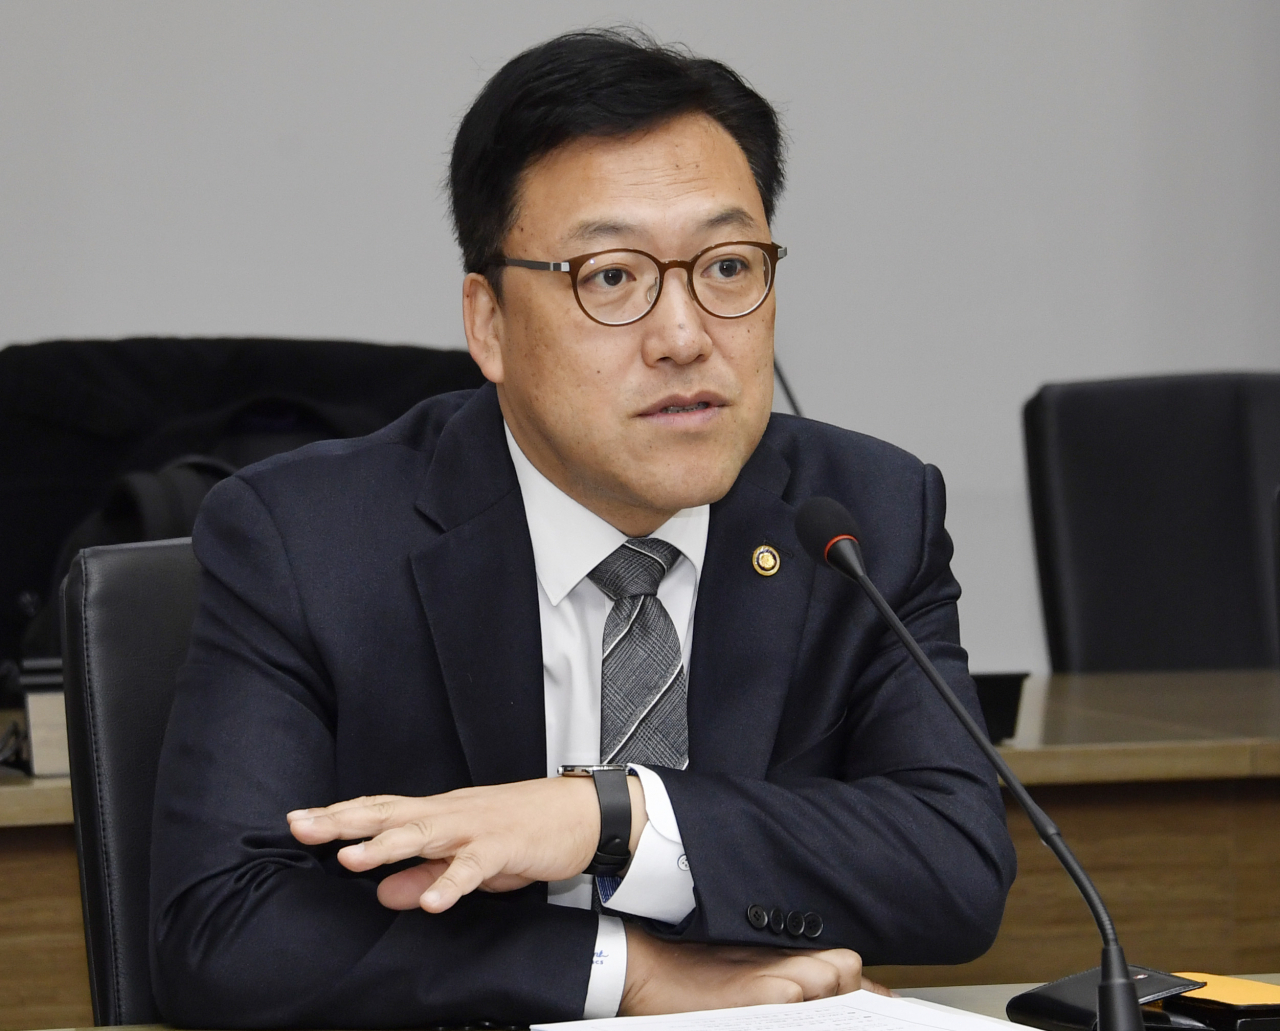 This photo, provided by the finance ministry on Wednesday, shows First Vice Finance Minister Kim Byoung-hwan. (Yonhap)